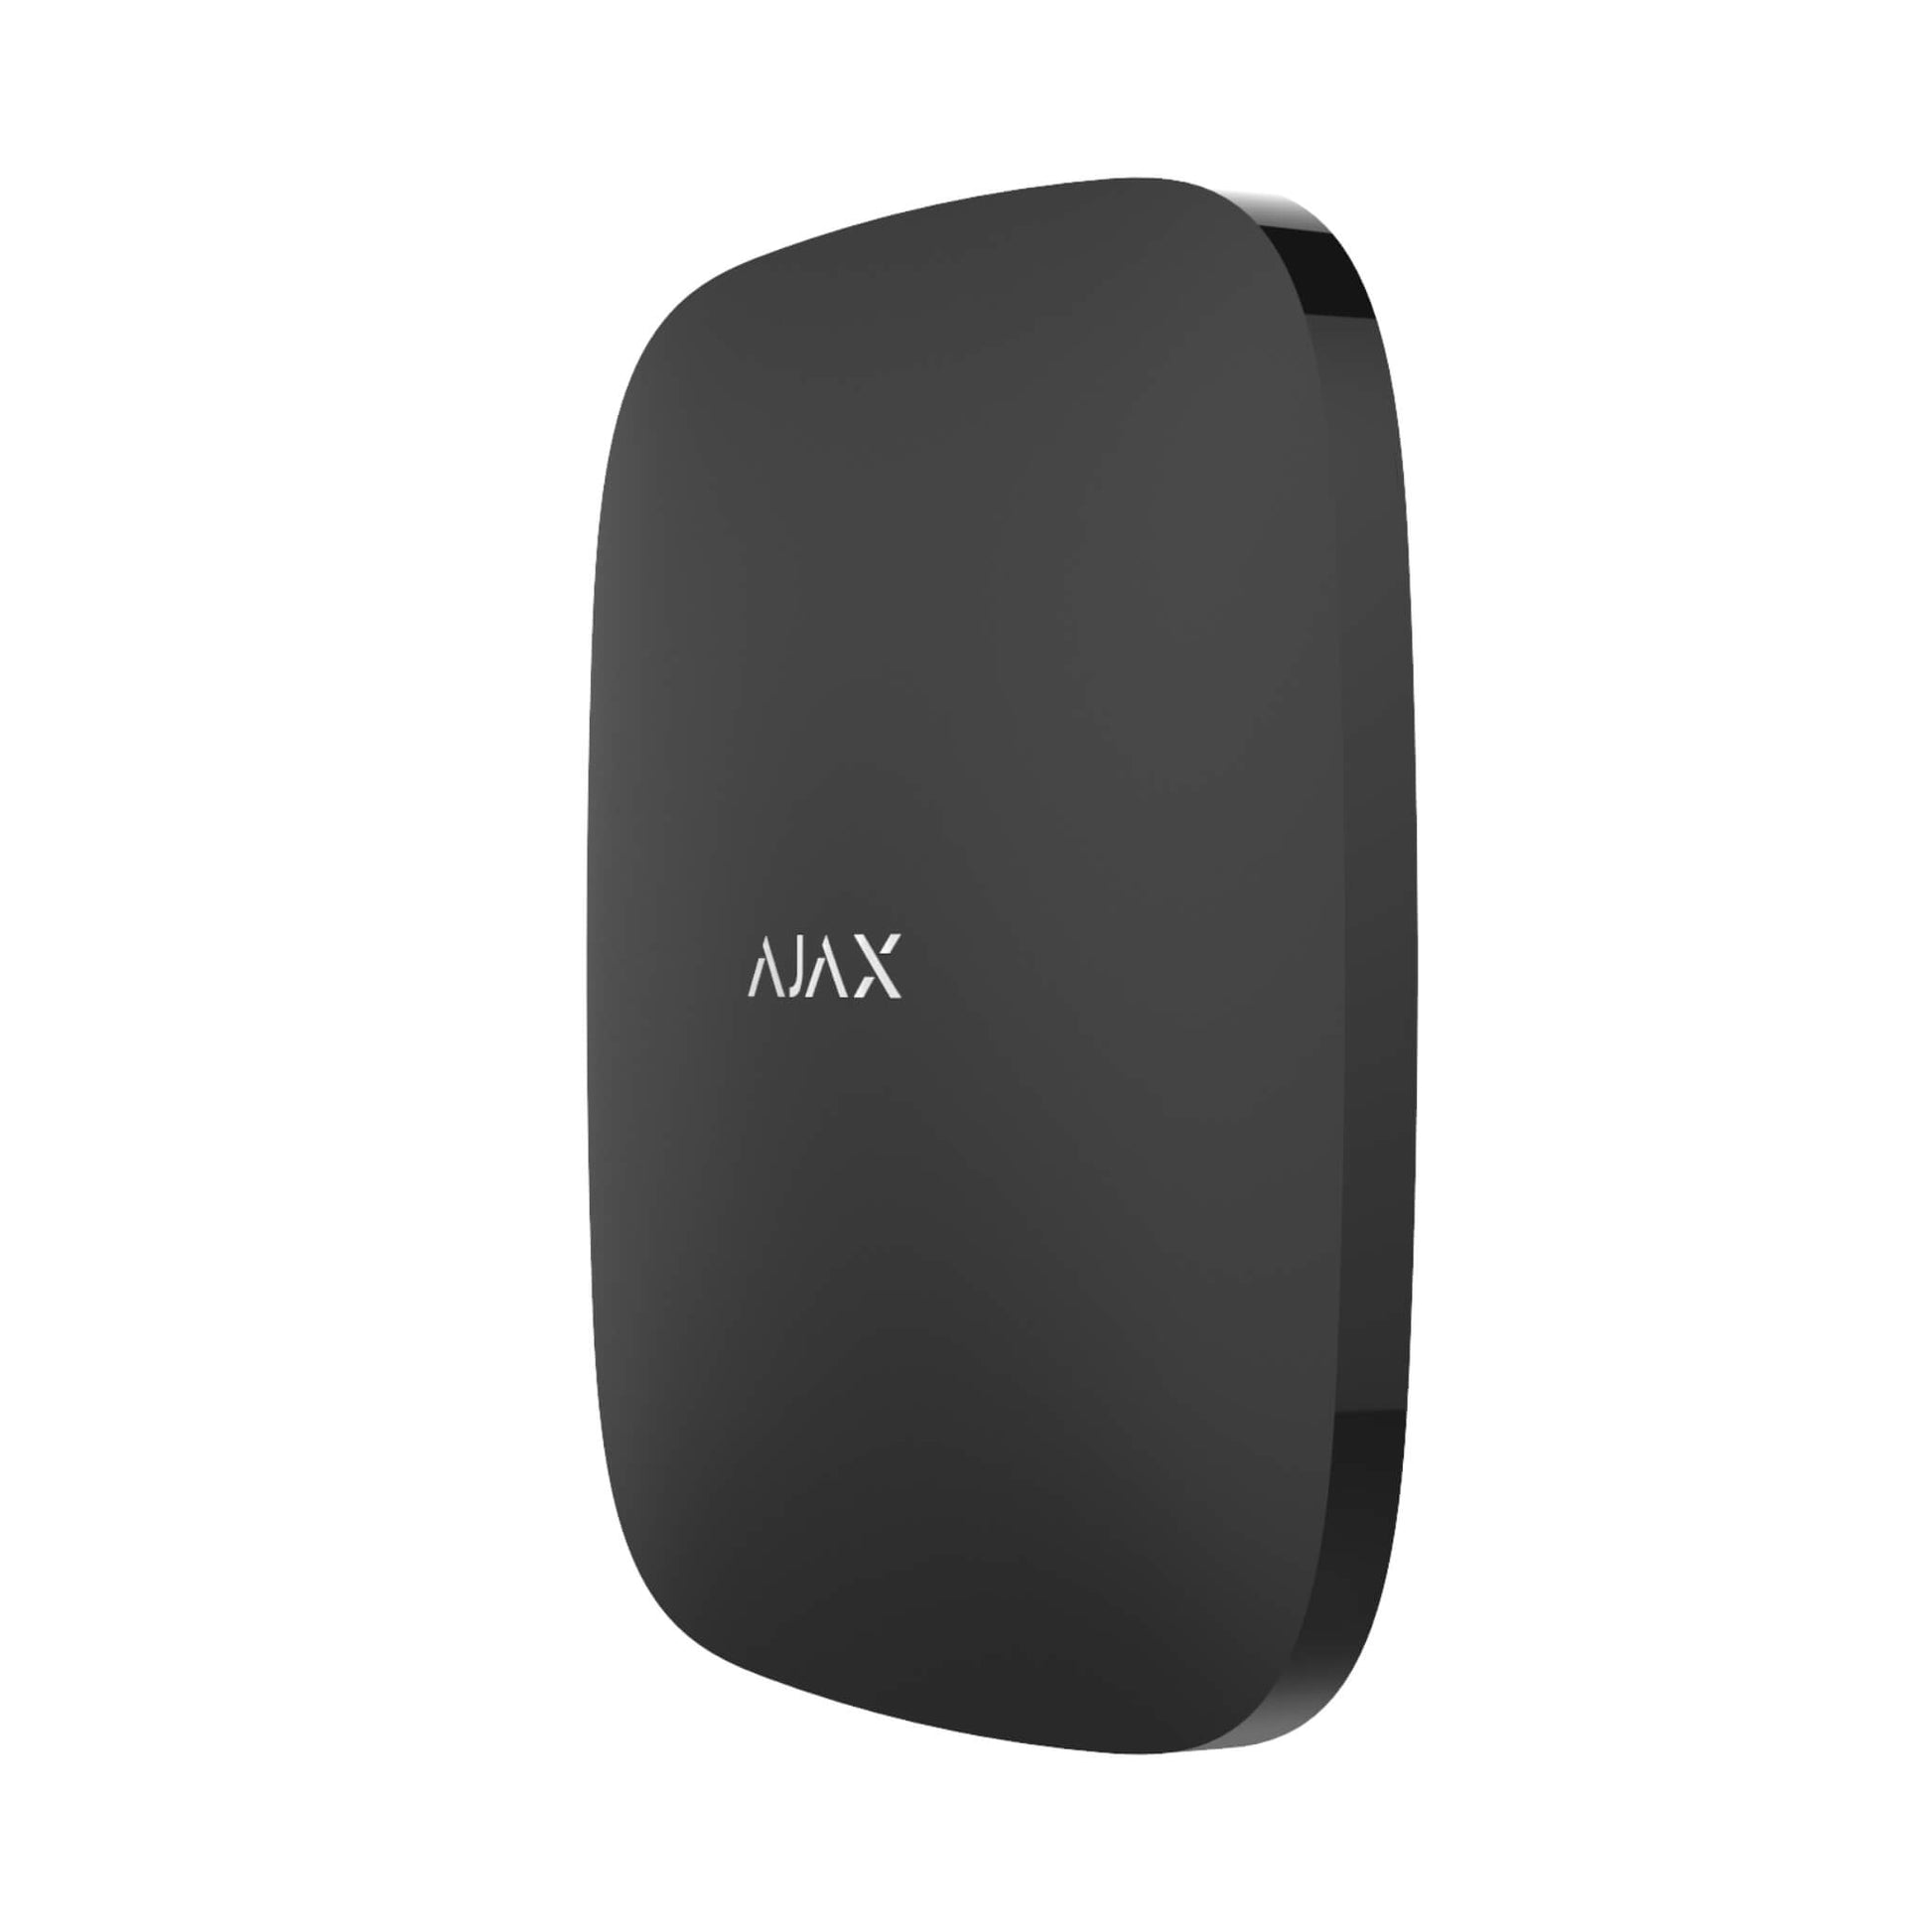 Ajax Security Systems Black ReX Radio range extender for Ajax Systems, for Home and Business security, 163 × 163 × 36 mm in size, 330 grams in weight , rated for Indoor use IP50, Side view of Device.